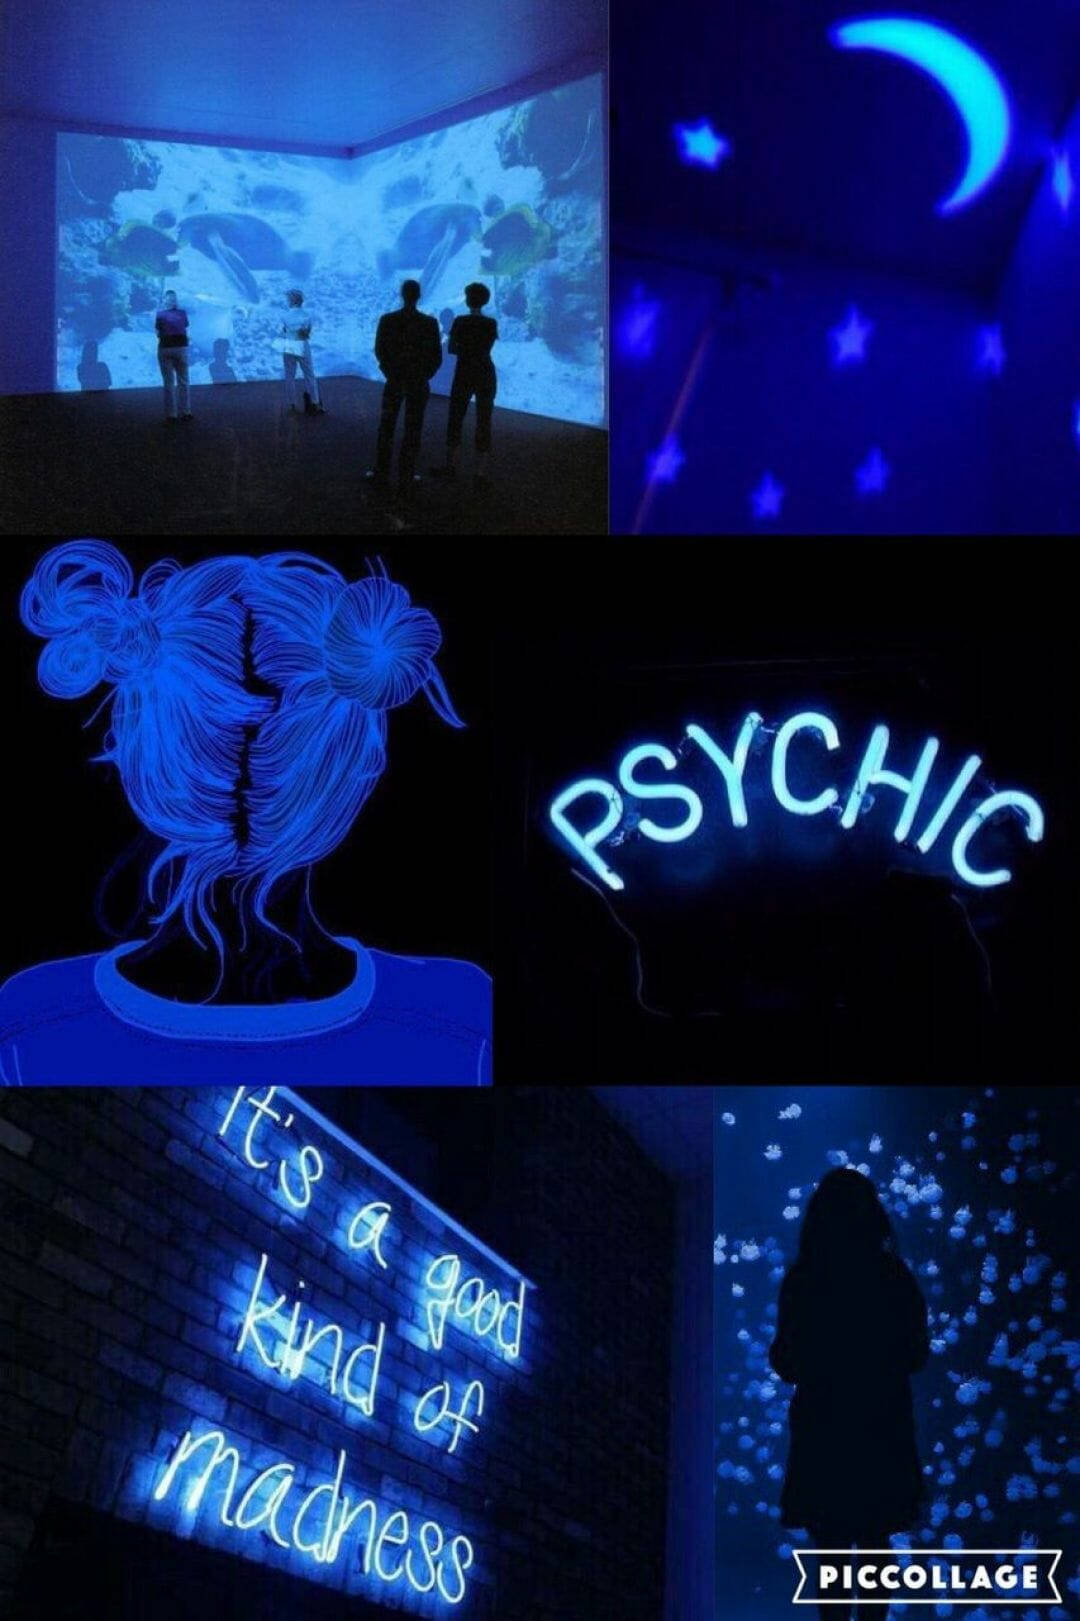 A Collage Of Photos With Blue Neon Lights And A Blue Sign Wallpaper